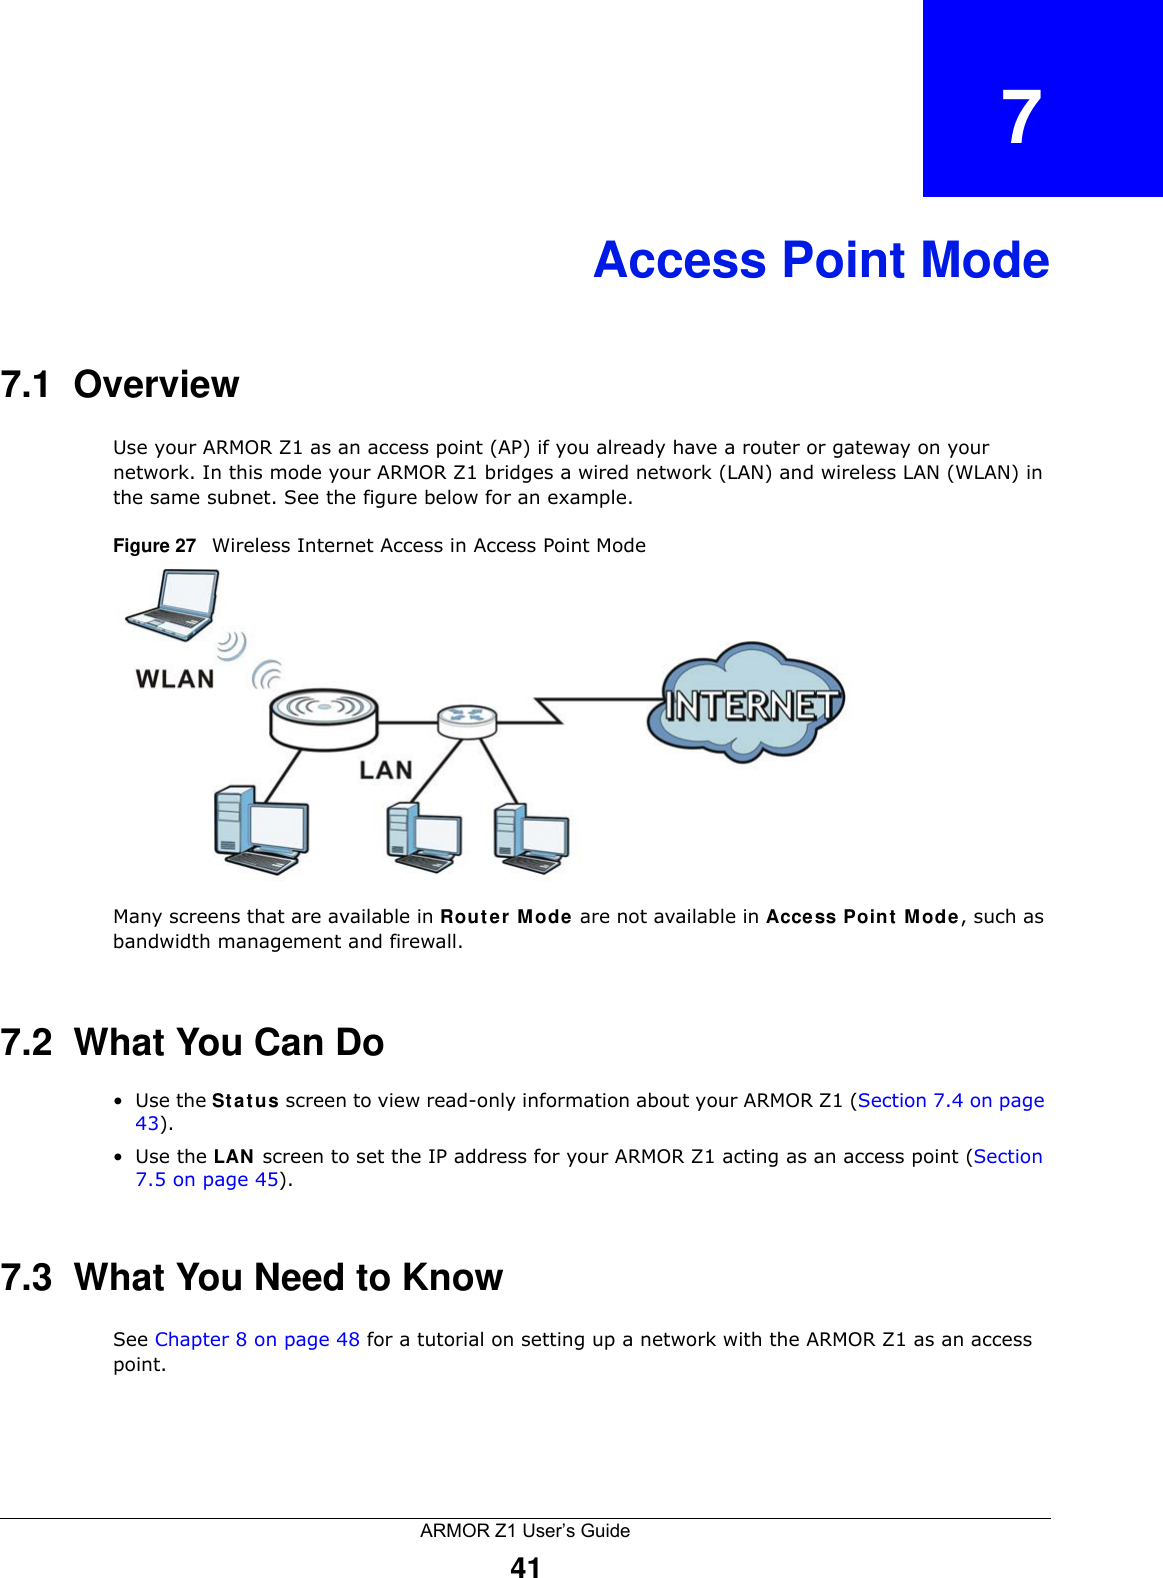 ARMOR Z1 User’s Guide41CHAPTER   7Access Point Mode7.1  OverviewUse your ARMOR Z1 as an access point (AP) if you already have a router or gateway on your network. In this mode your ARMOR Z1 bridges a wired network (LAN) and wireless LAN (WLAN) in the same subnet. See the figure below for an example.Figure 27   Wireless Internet Access in Access Point Mode Many screens that are available in Router Mode are not available in Access Point Mode, such as bandwidth management and firewall.7.2  What You Can Do•Use the Status screen to view read-only information about your ARMOR Z1 (Section 7.4 on page 43).•Use the LAN screen to set the IP address for your ARMOR Z1 acting as an access point (Section 7.5 on page 45).7.3  What You Need to KnowSee Chapter 8 on page 48 for a tutorial on setting up a network with the ARMOR Z1 as an access point.